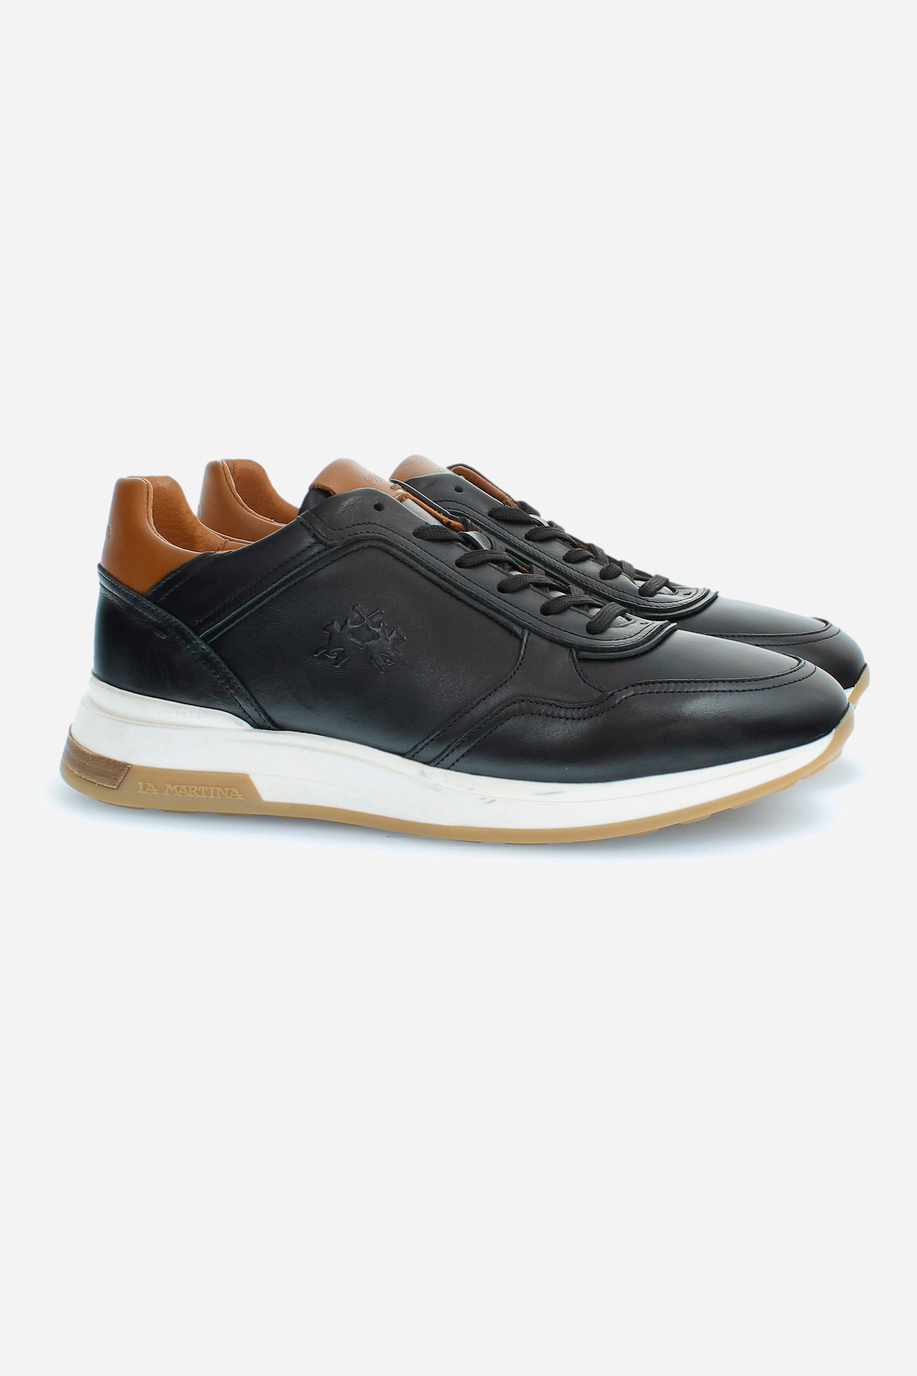 Men's trainers with raised sole - Sneakers | La Martina - Official Online Shop